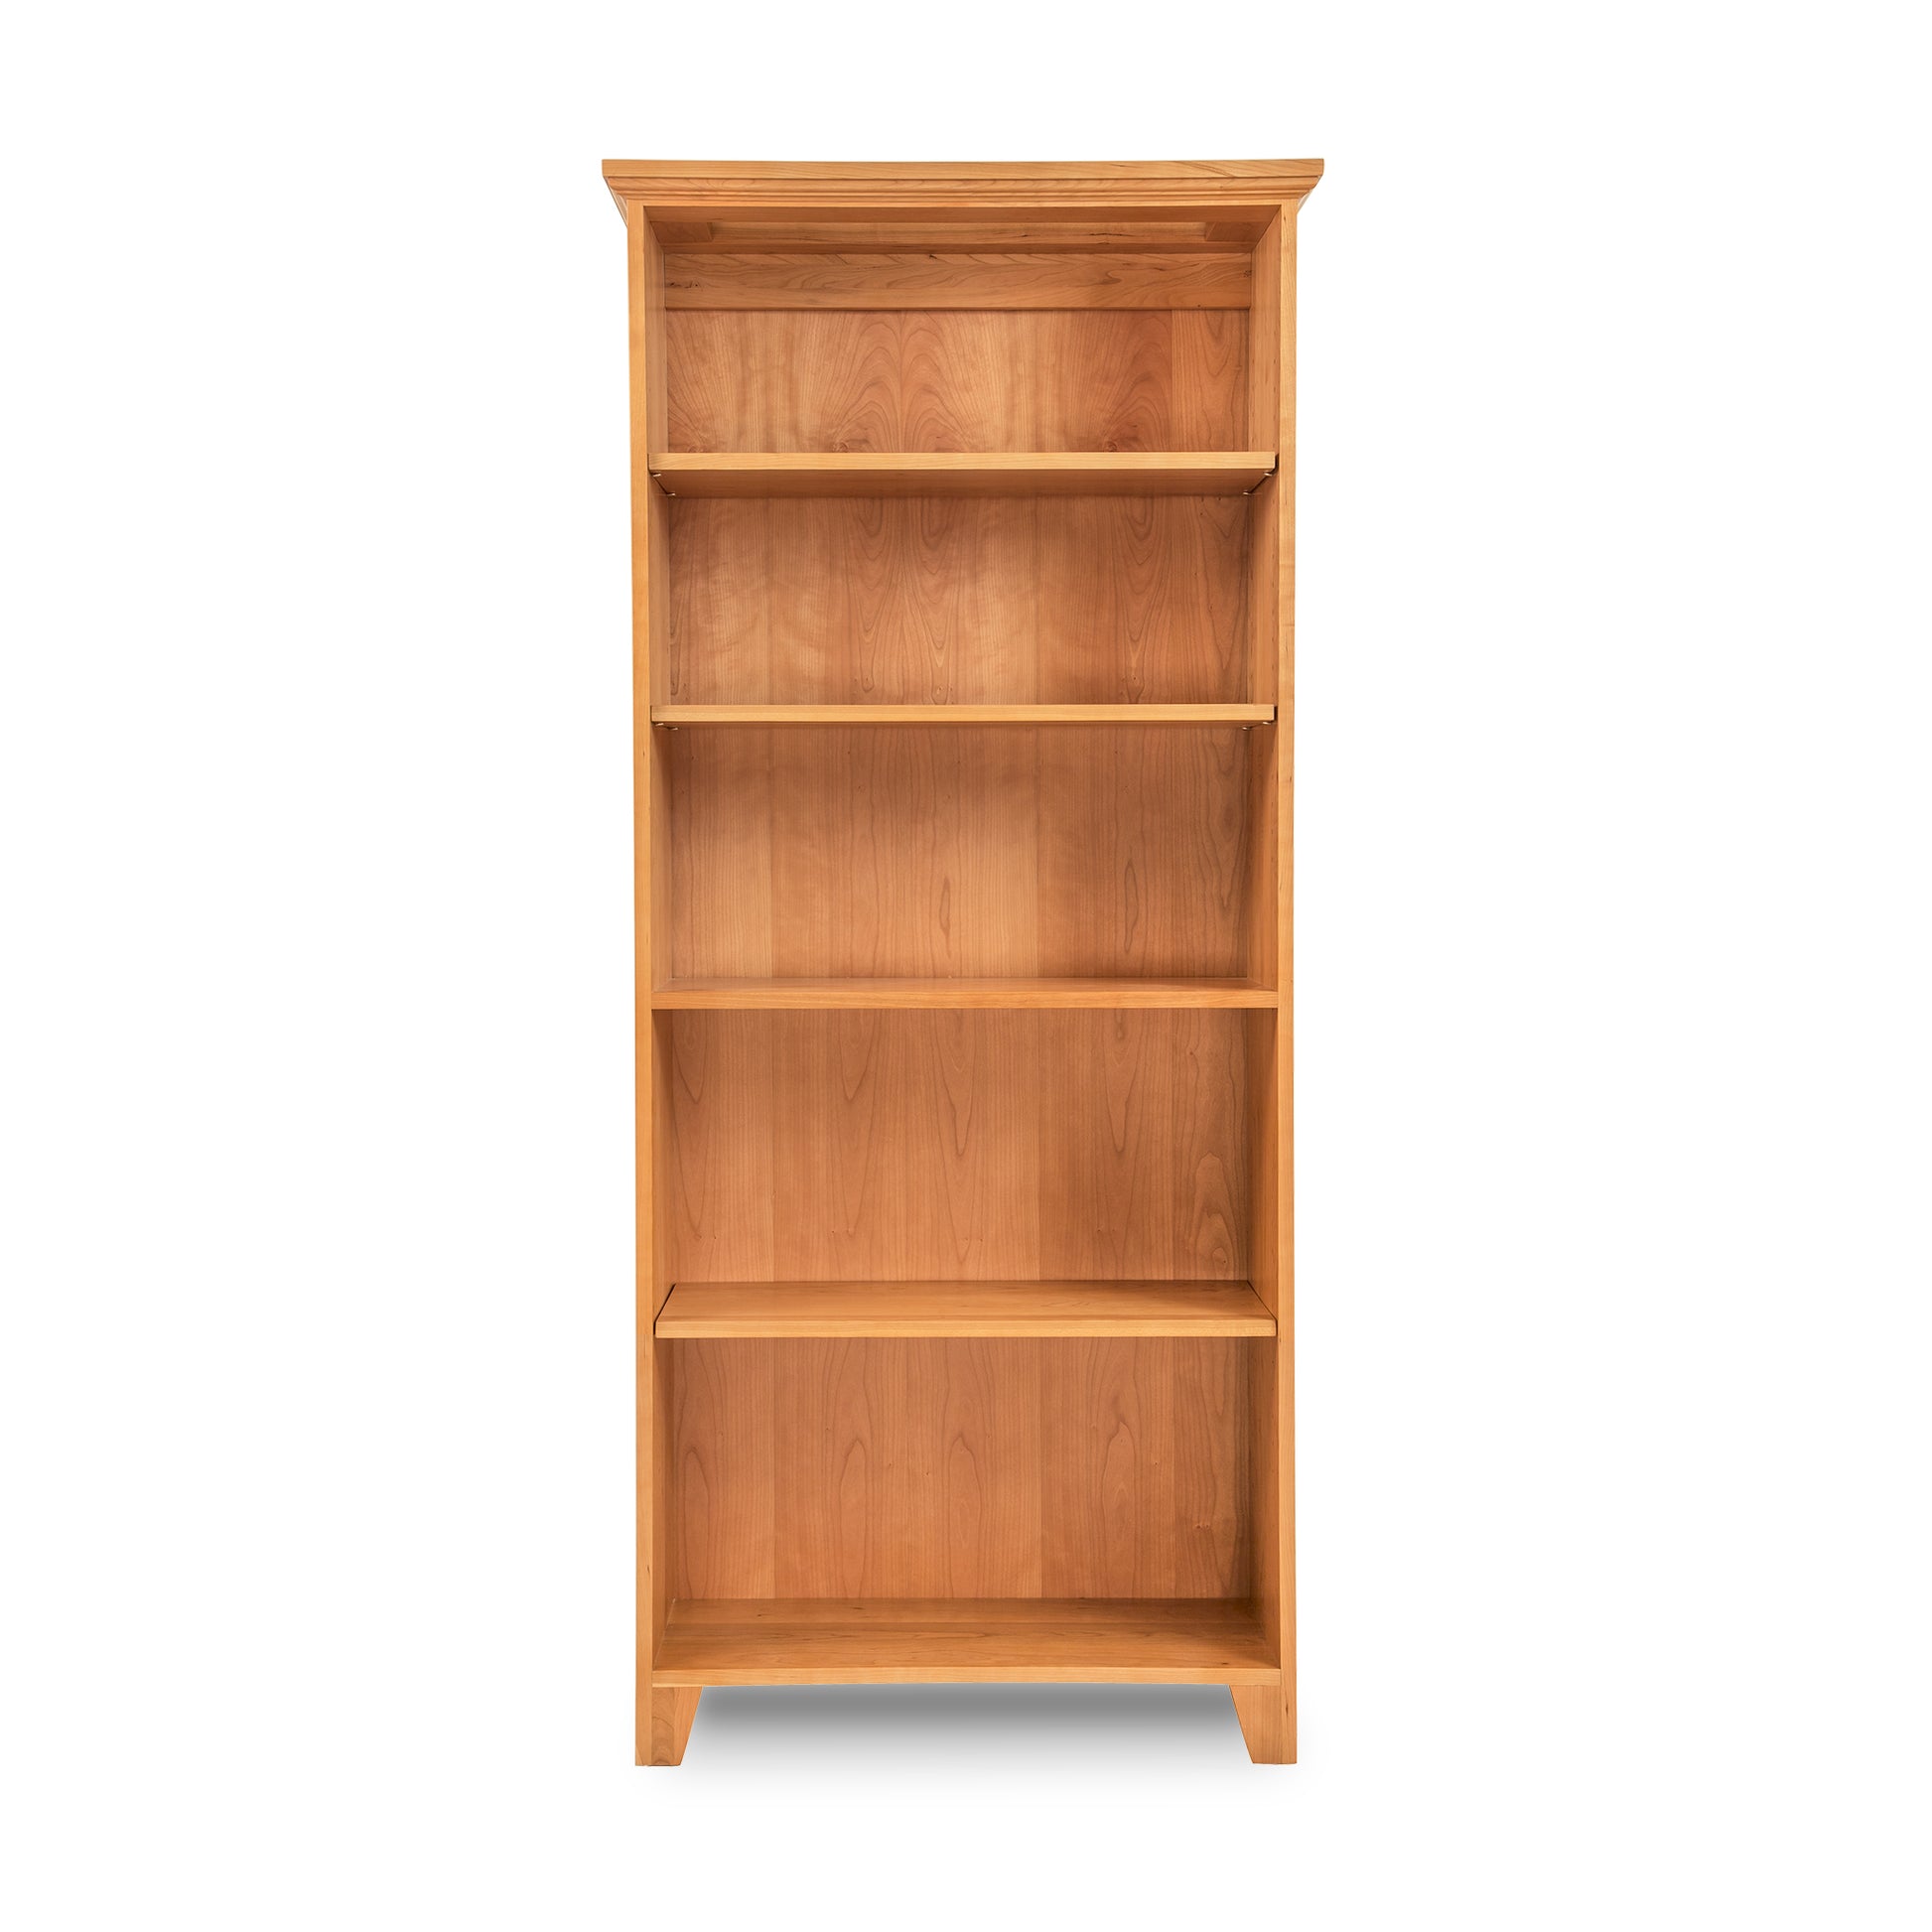 A luxury Shaker Bookcase made from Lyndon Furniture, standing on a white background.